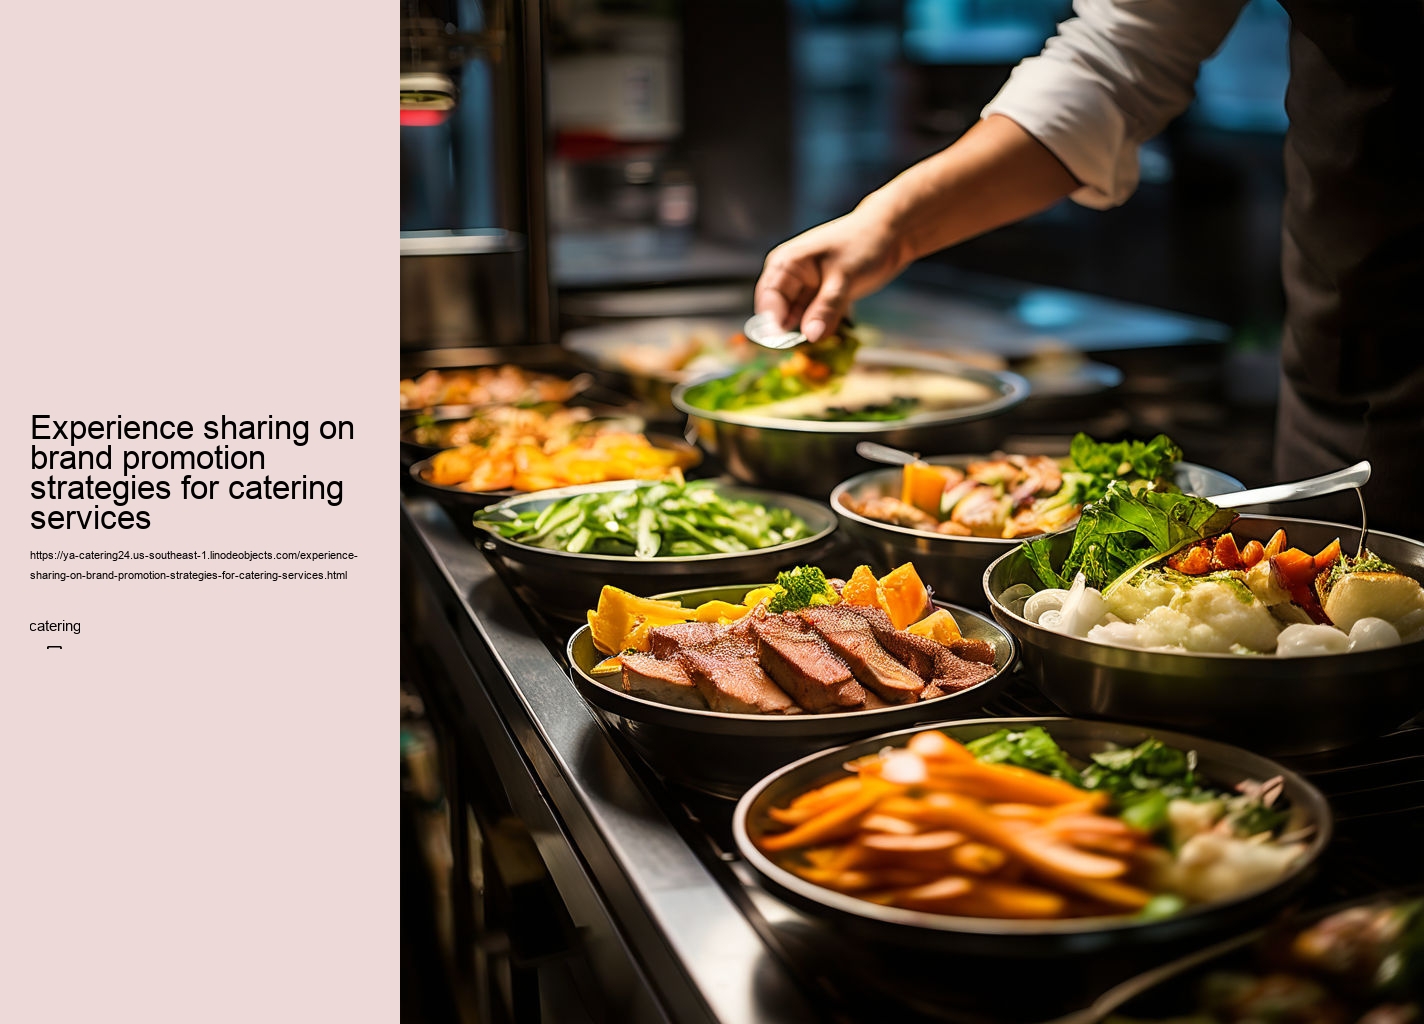 Experience sharing on brand promotion strategies for catering services